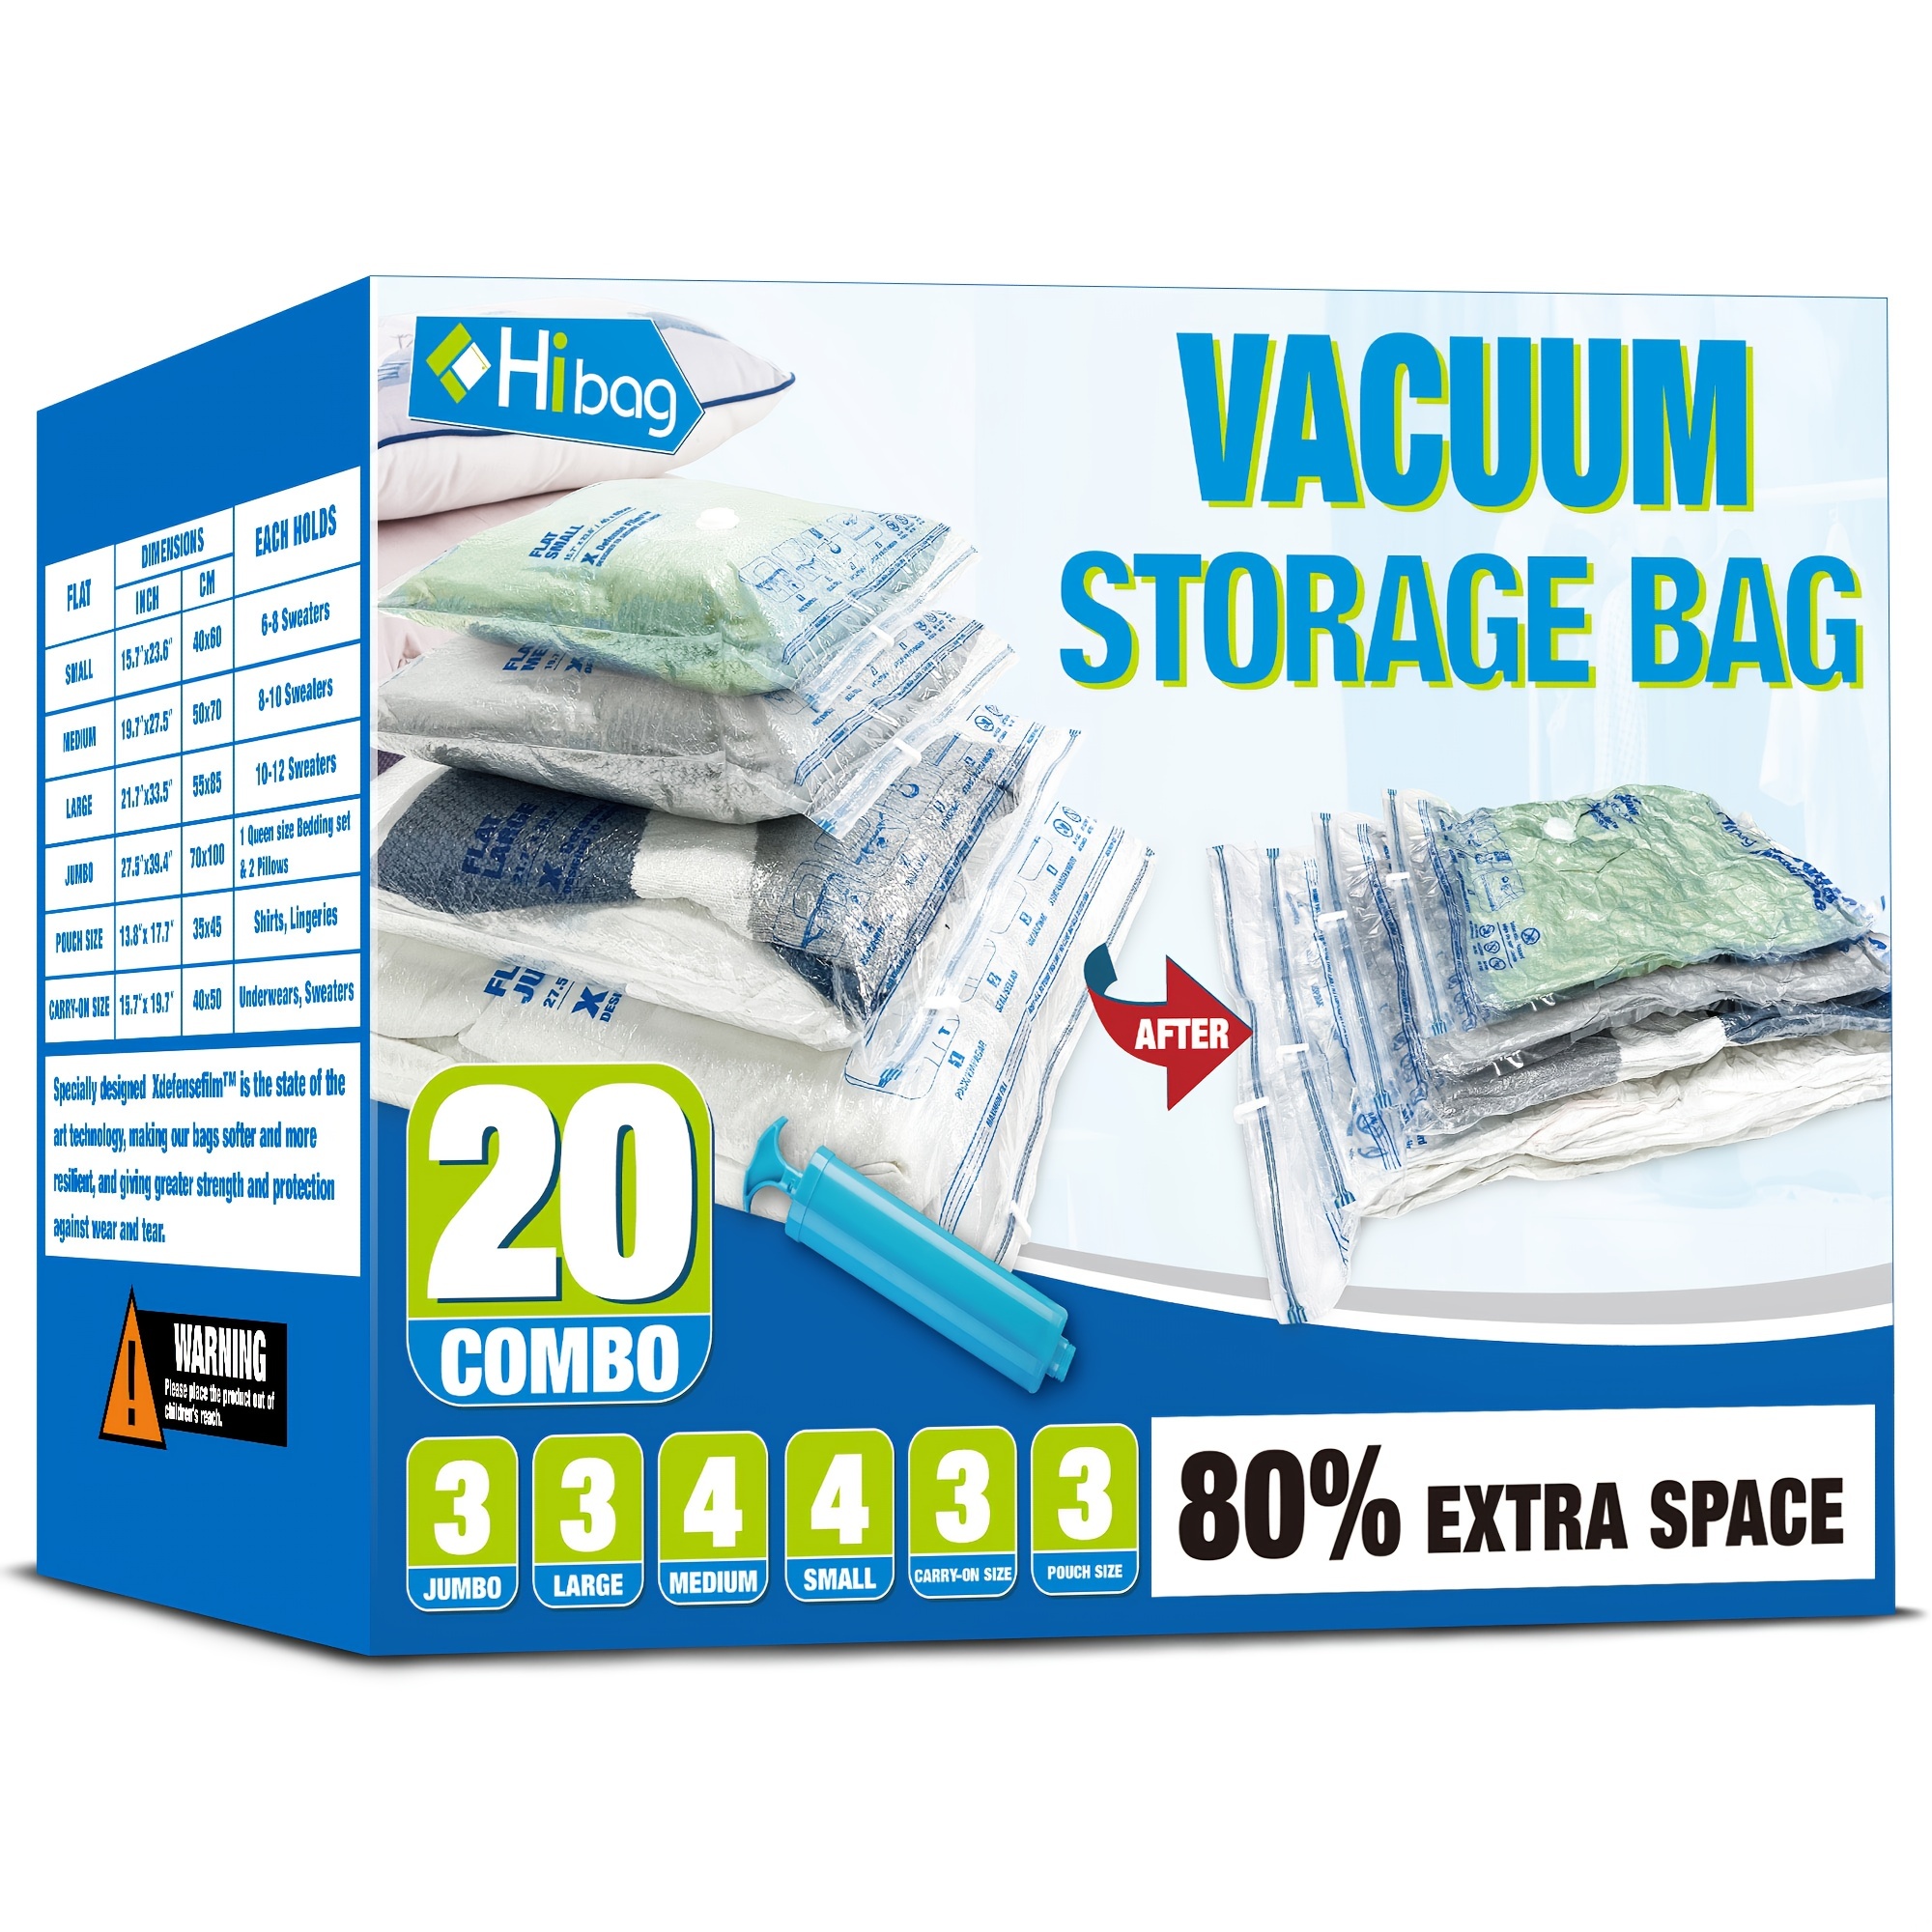  10 Pack Travel Space Saver Bags Vacuum Storage, with Sizes  Medium to Large, Sealer Bag Roll-up Compression Storage No Vacuum Needed  and Packing Organizers for Travel, comforters, blankets, and Clothes 